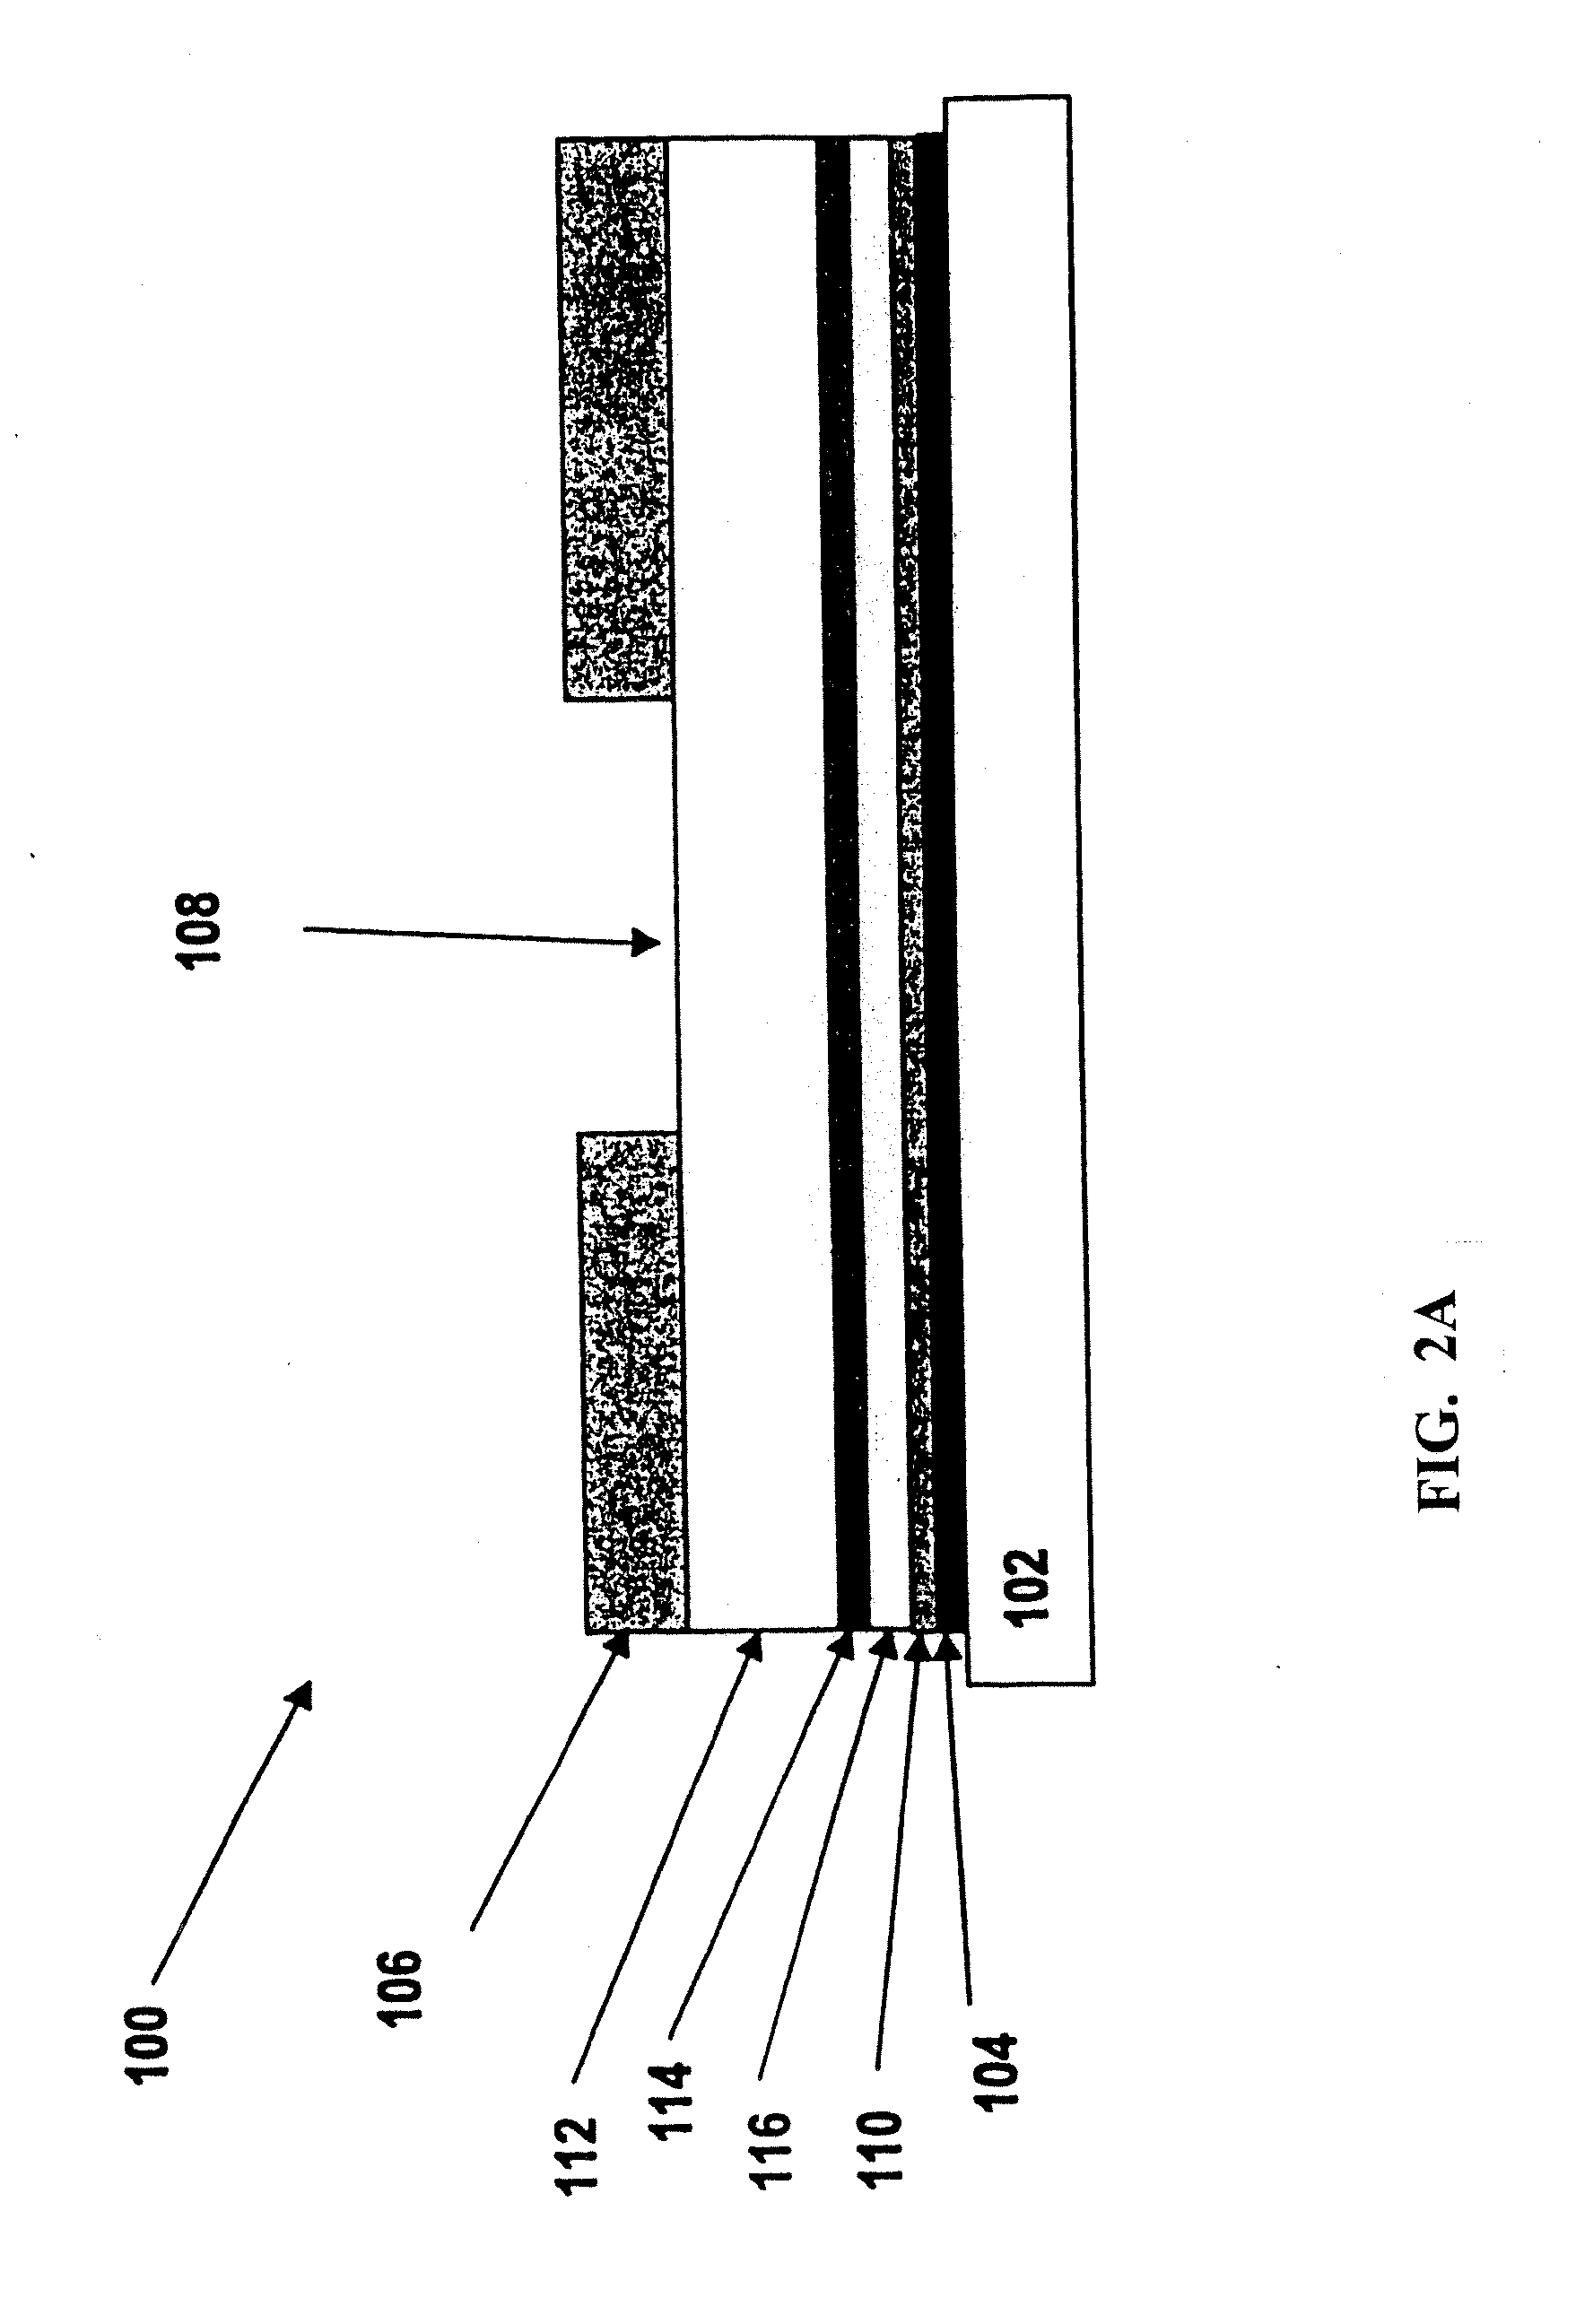 Analyte sensor apparatuses having interference rejection membranes and methods for making and using them